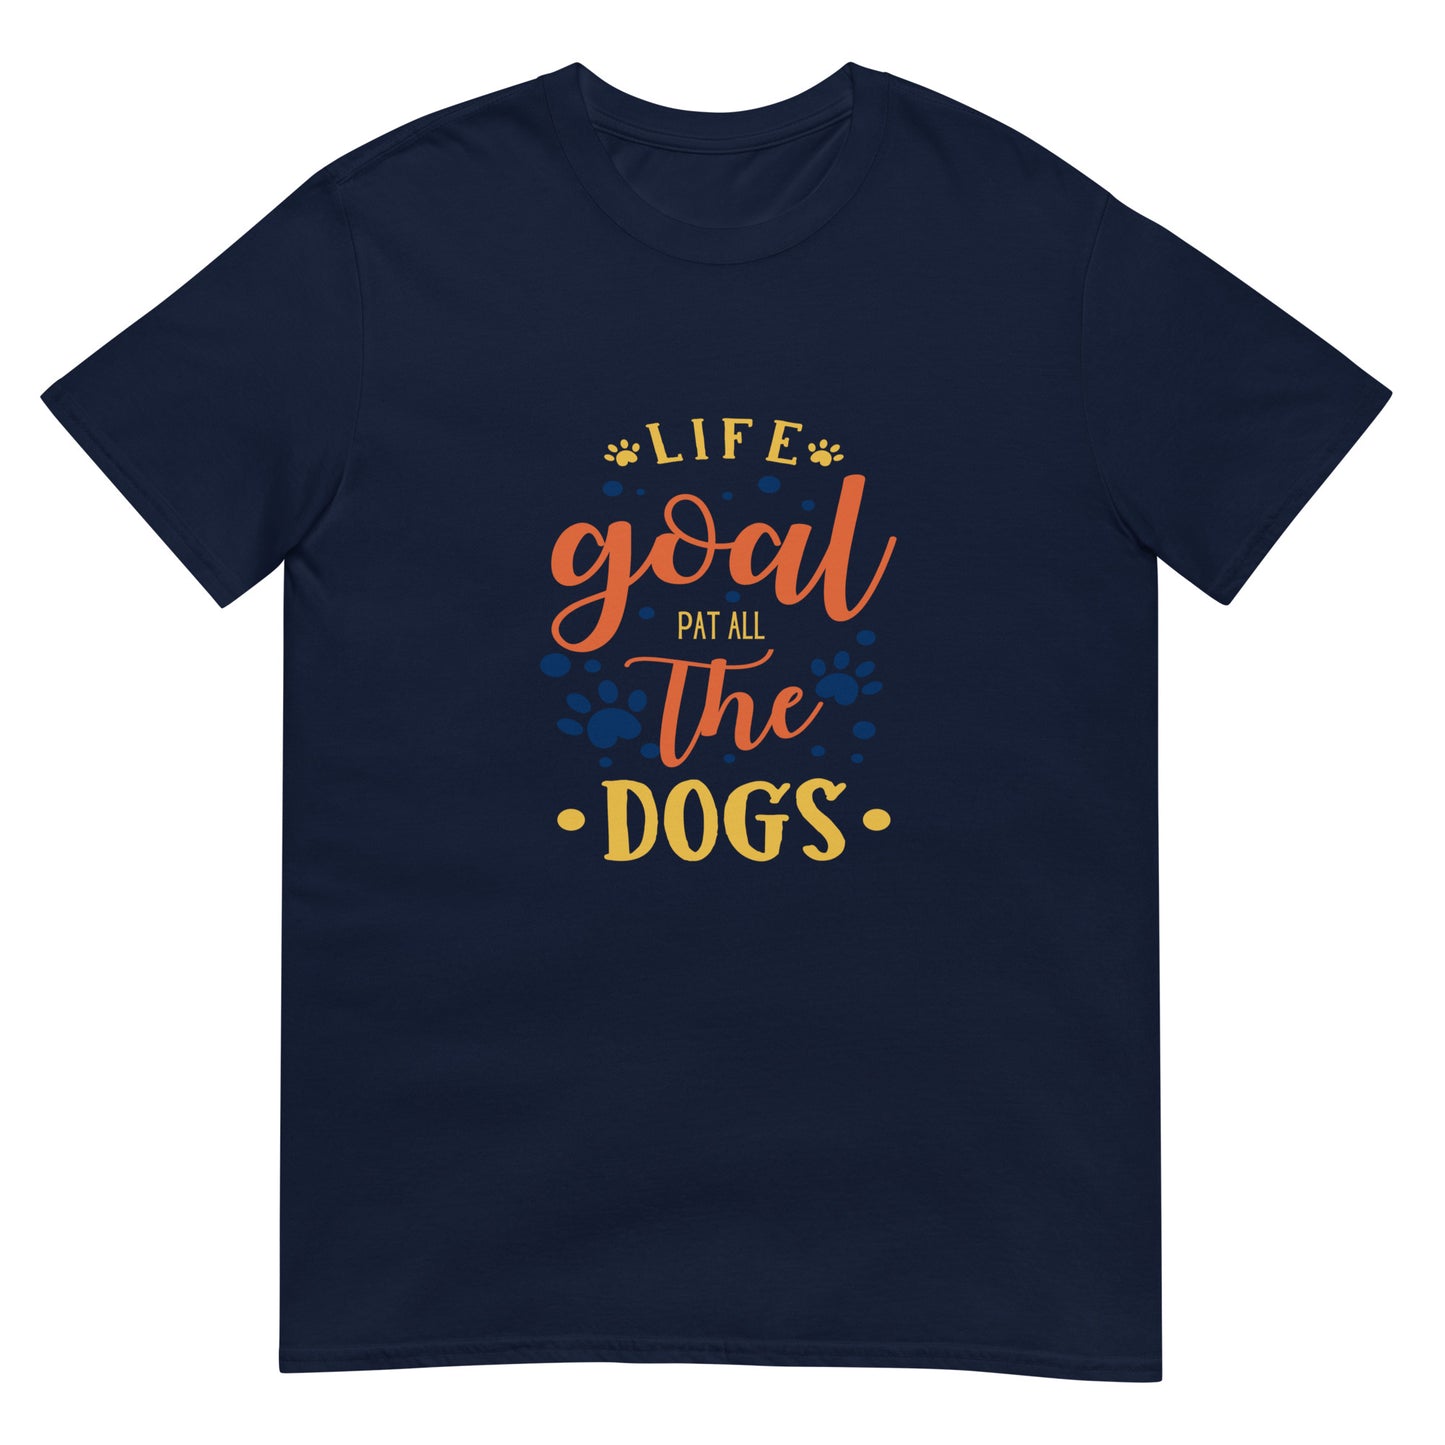 Pat All The Dogs Unisex T-Shirt